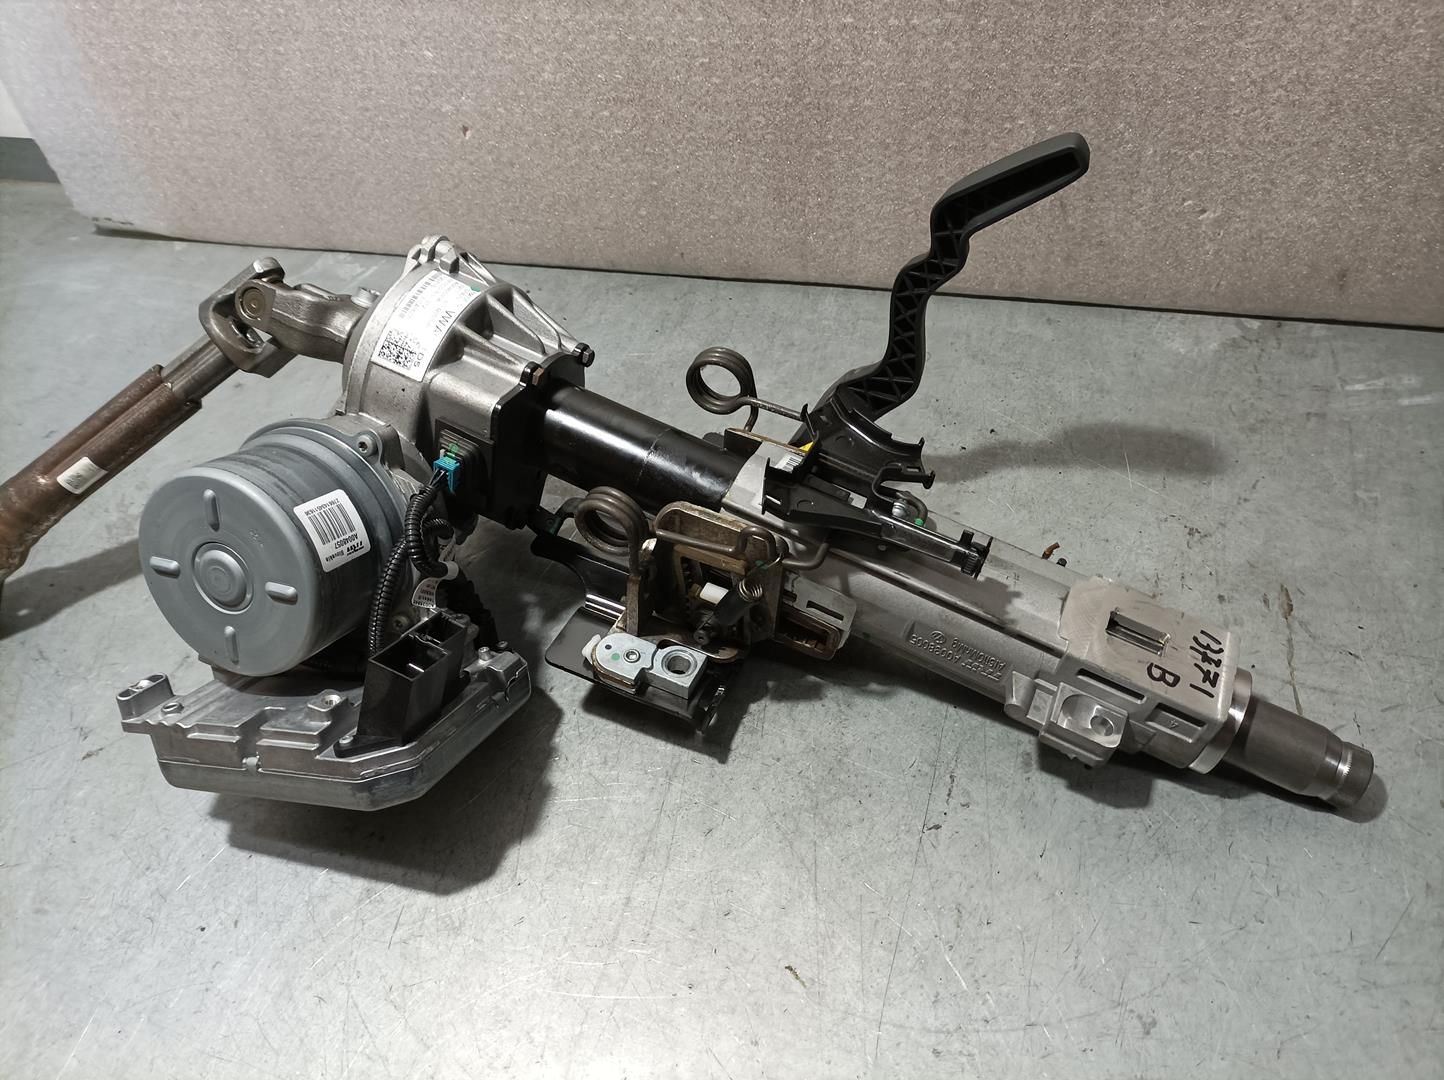 VOLKSWAGEN Polo 5 generation (2009-2017) Steering Column Mechanism 6C1423510AE, A0046590A, ELECTRO-MECANICA 23626358